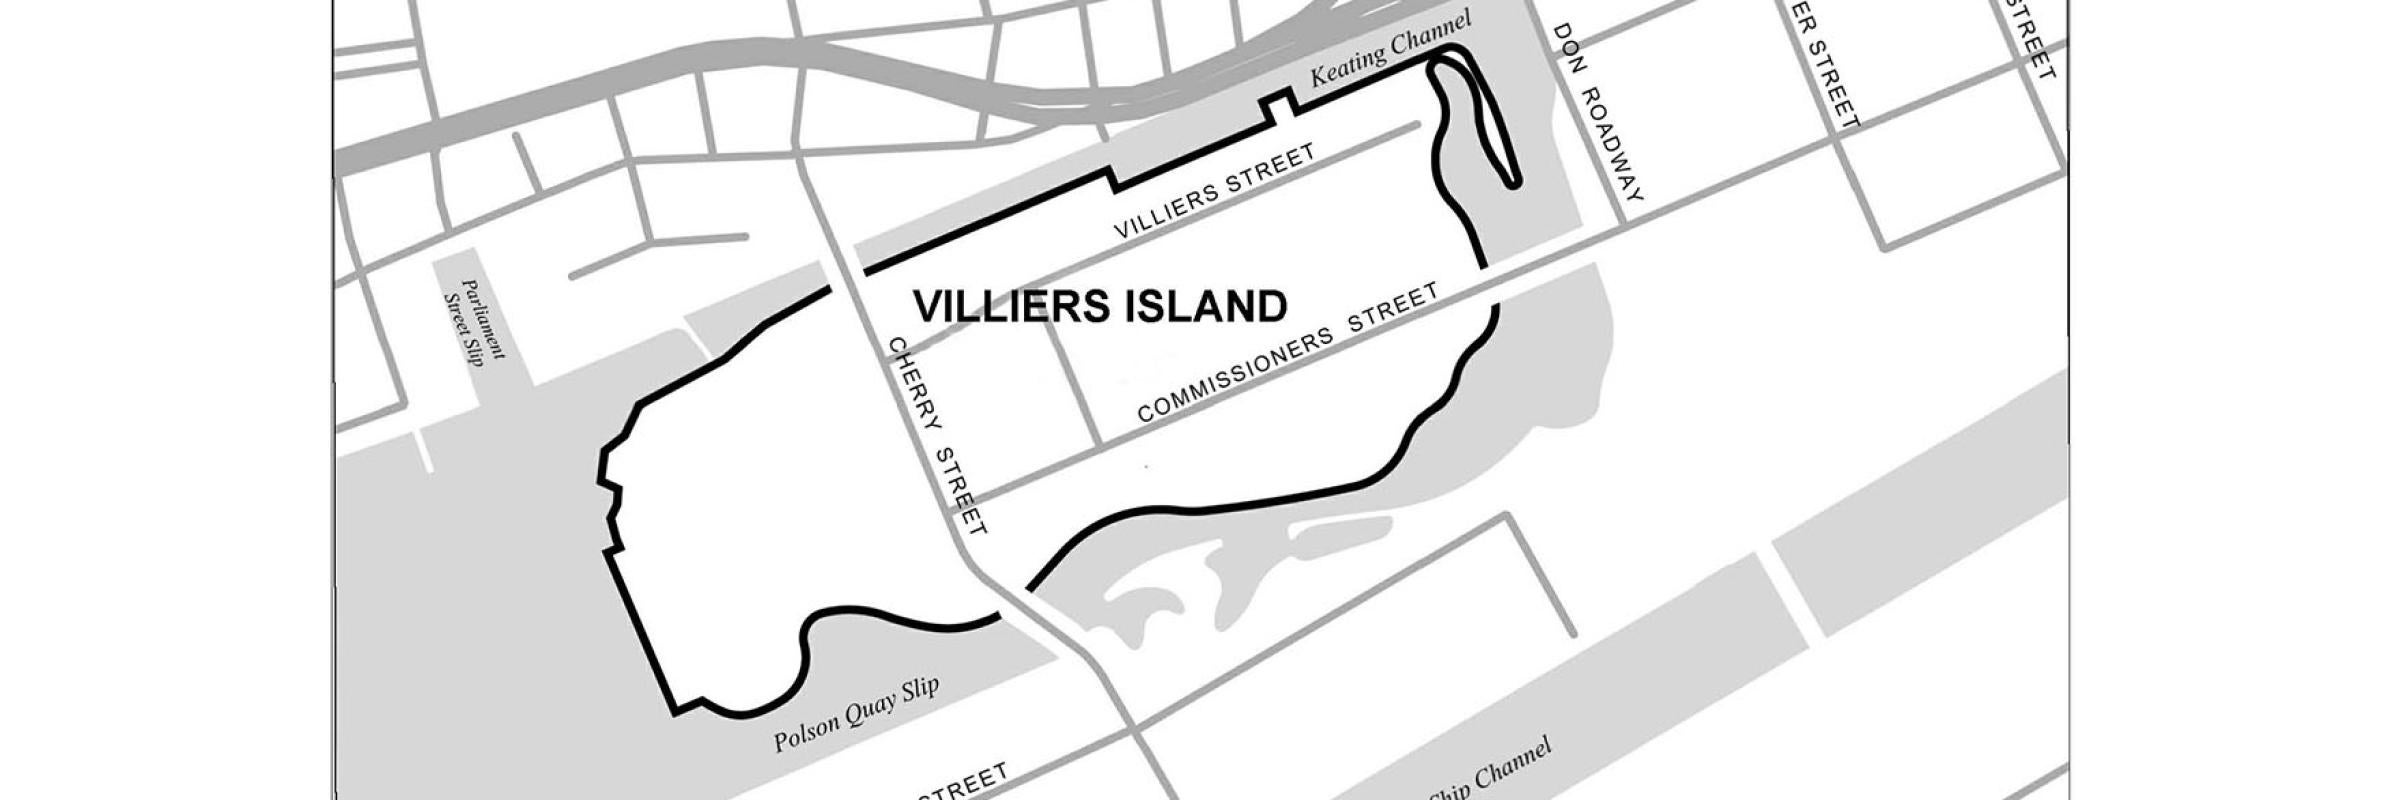 Overhead map showing Villiers Island.